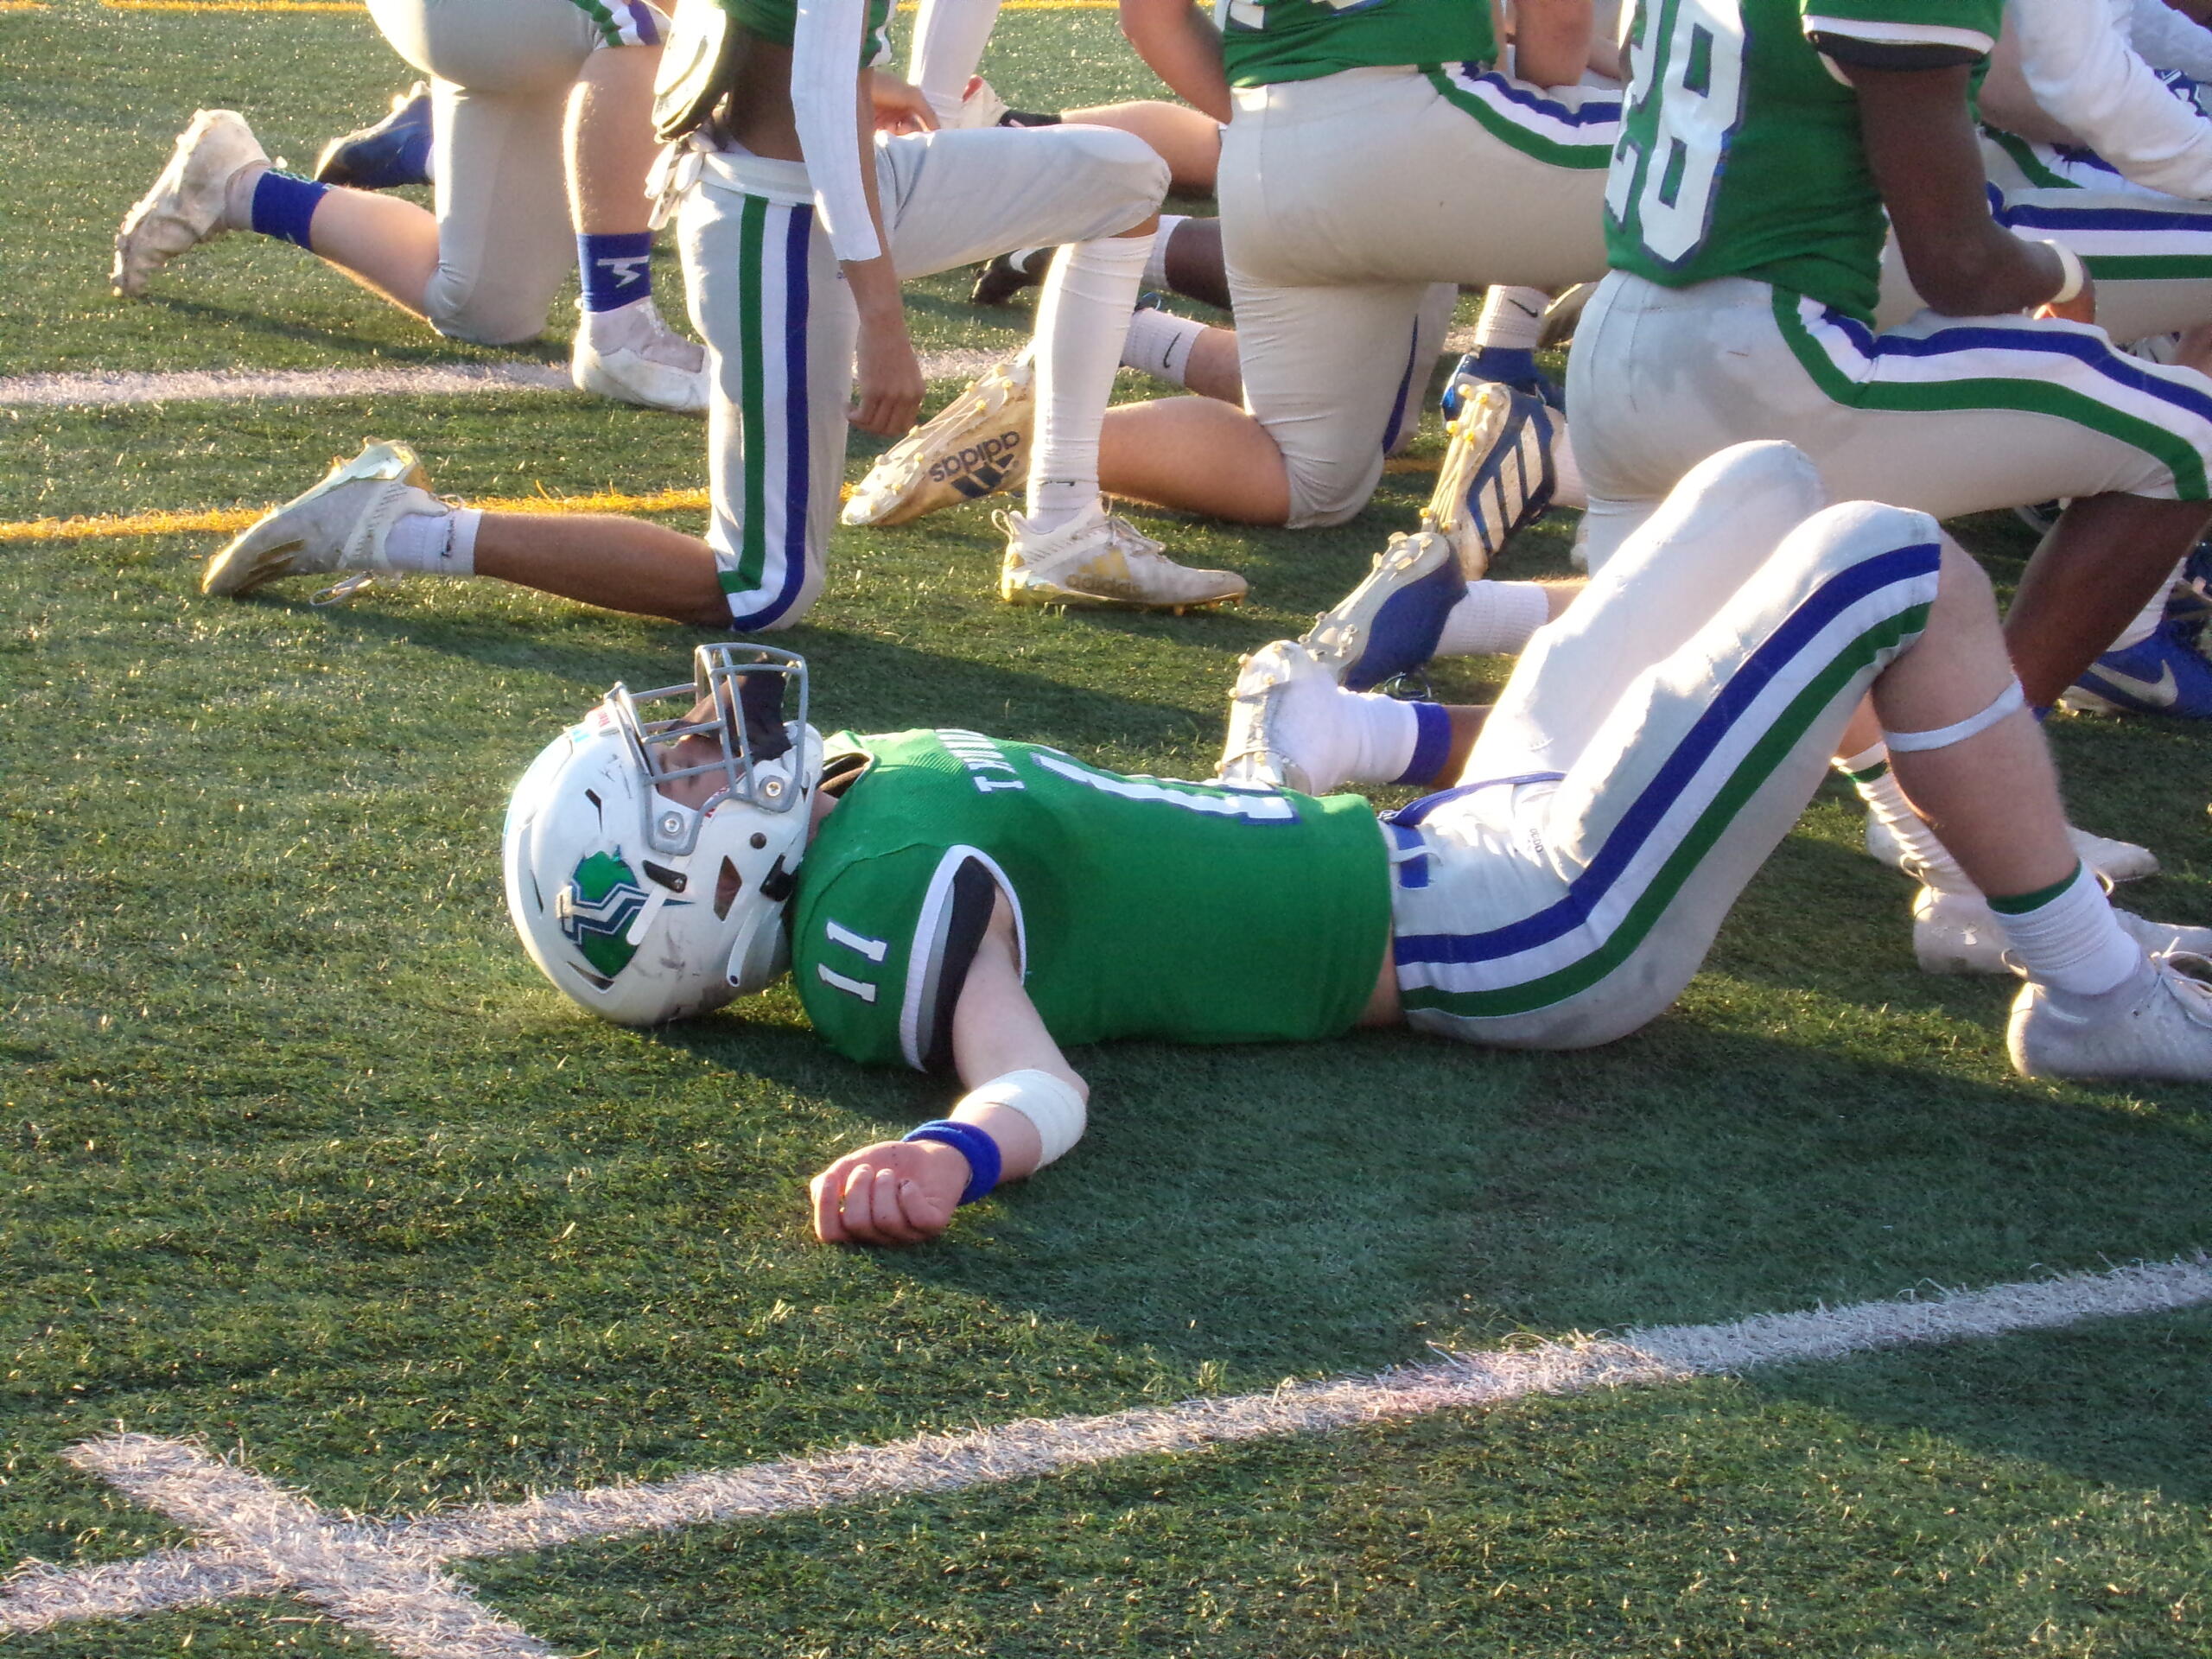 An exhausted Zak Gable lies on the McKenzie Stadium turf after Mountain View's 30-24 win in overtime against Prairie (Tim Martinez / The Columbian)